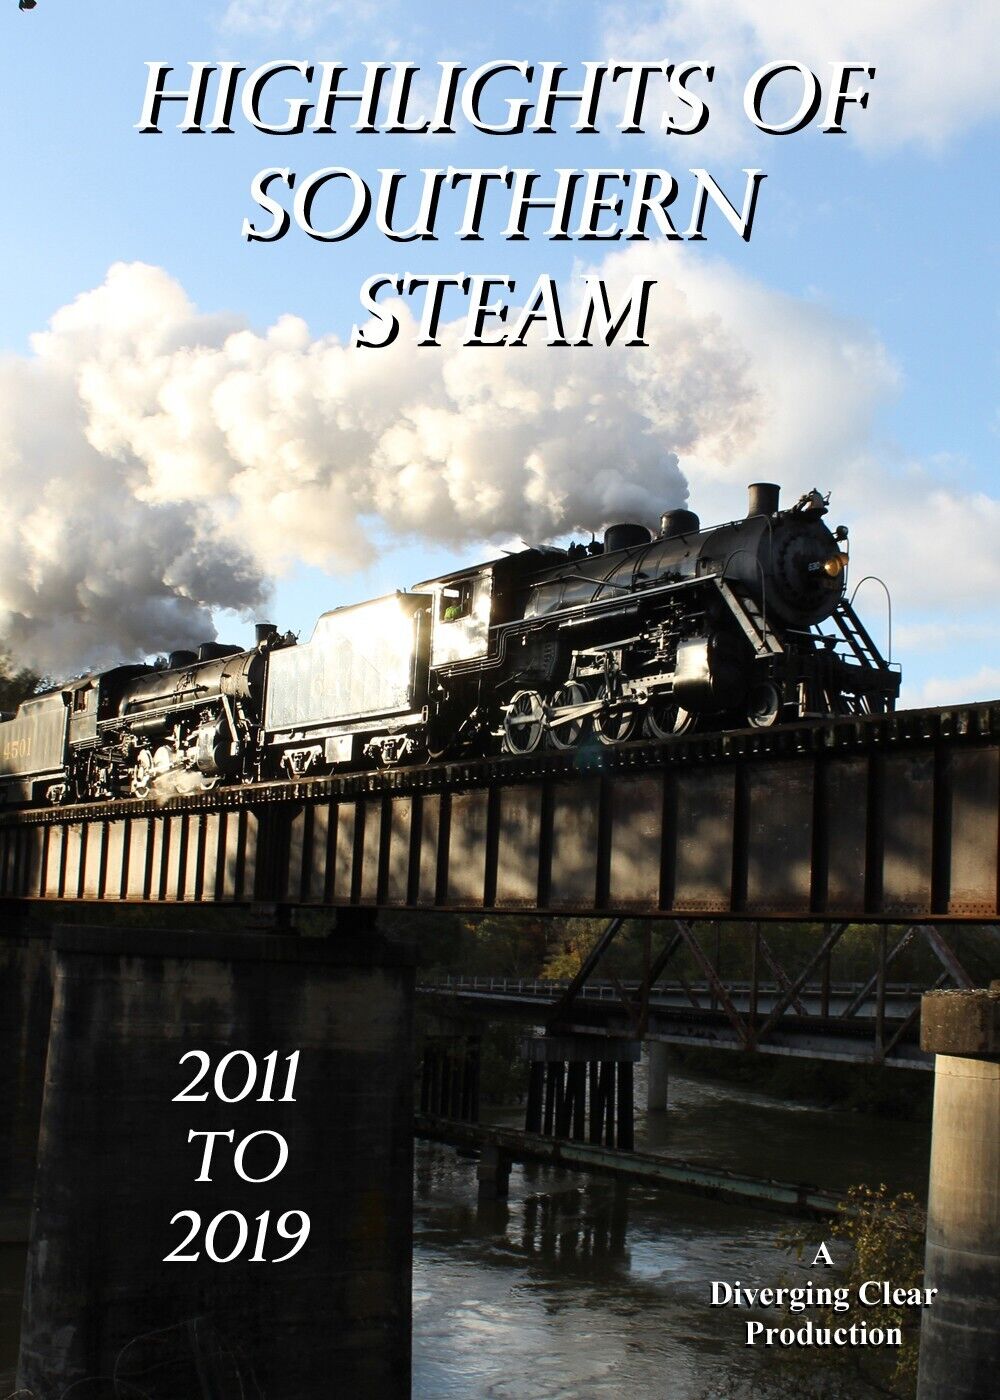 DVD: Highlights of a decade of Southern Railway 4501, 630, 401 and 154